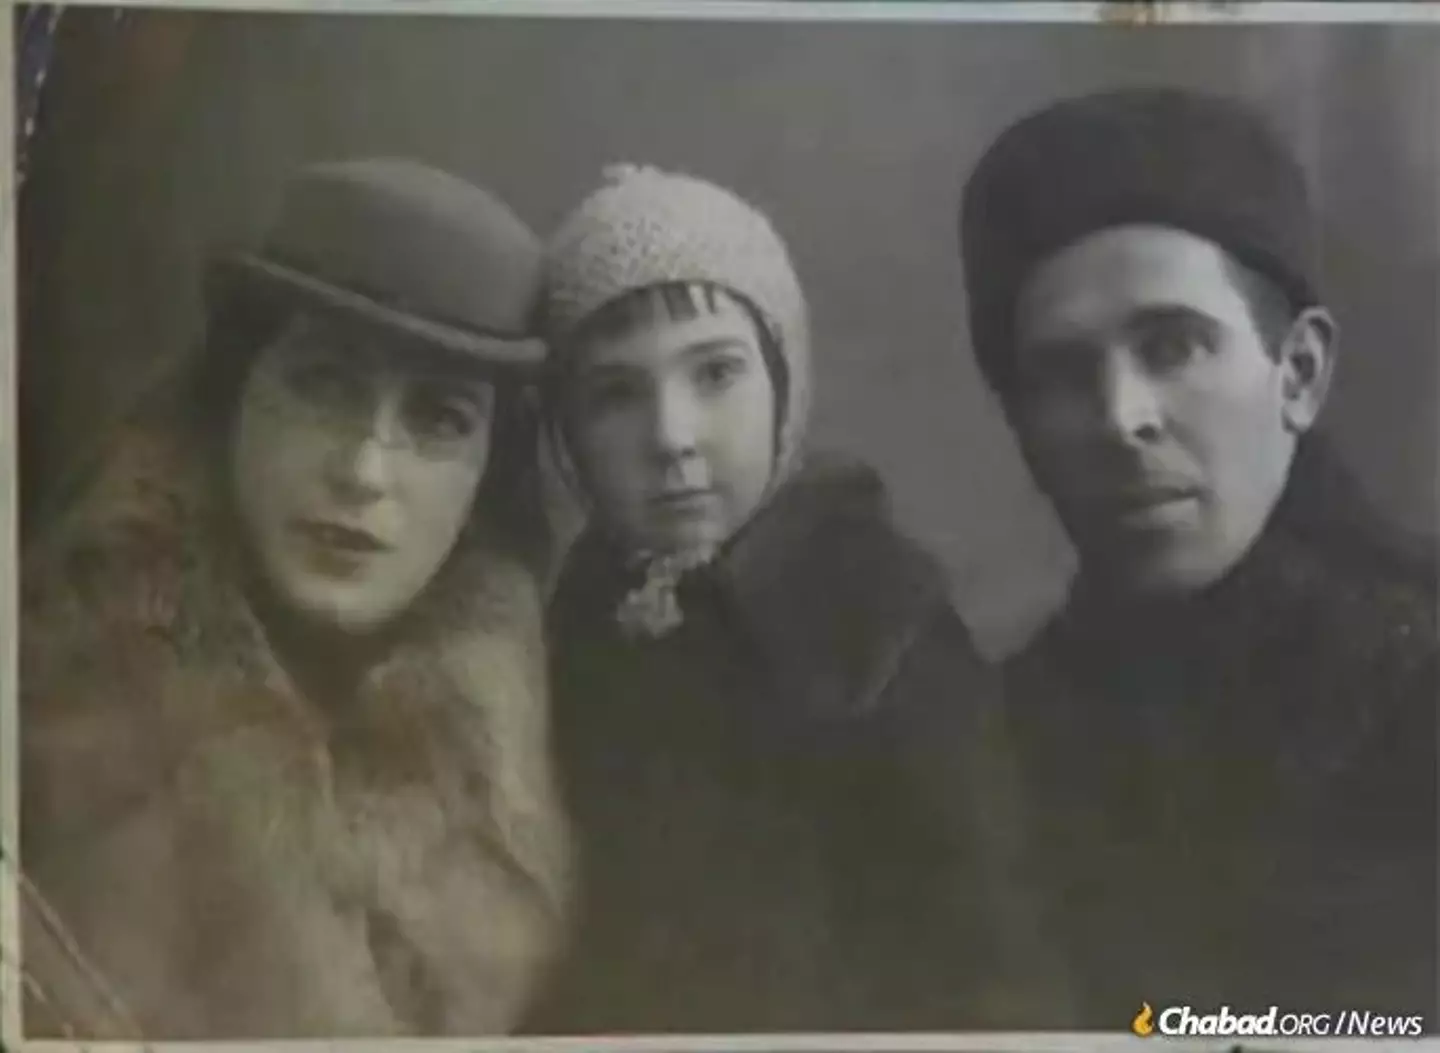 In 1941, Obiedkova's mother and her mother's family were all executed by Nazis.